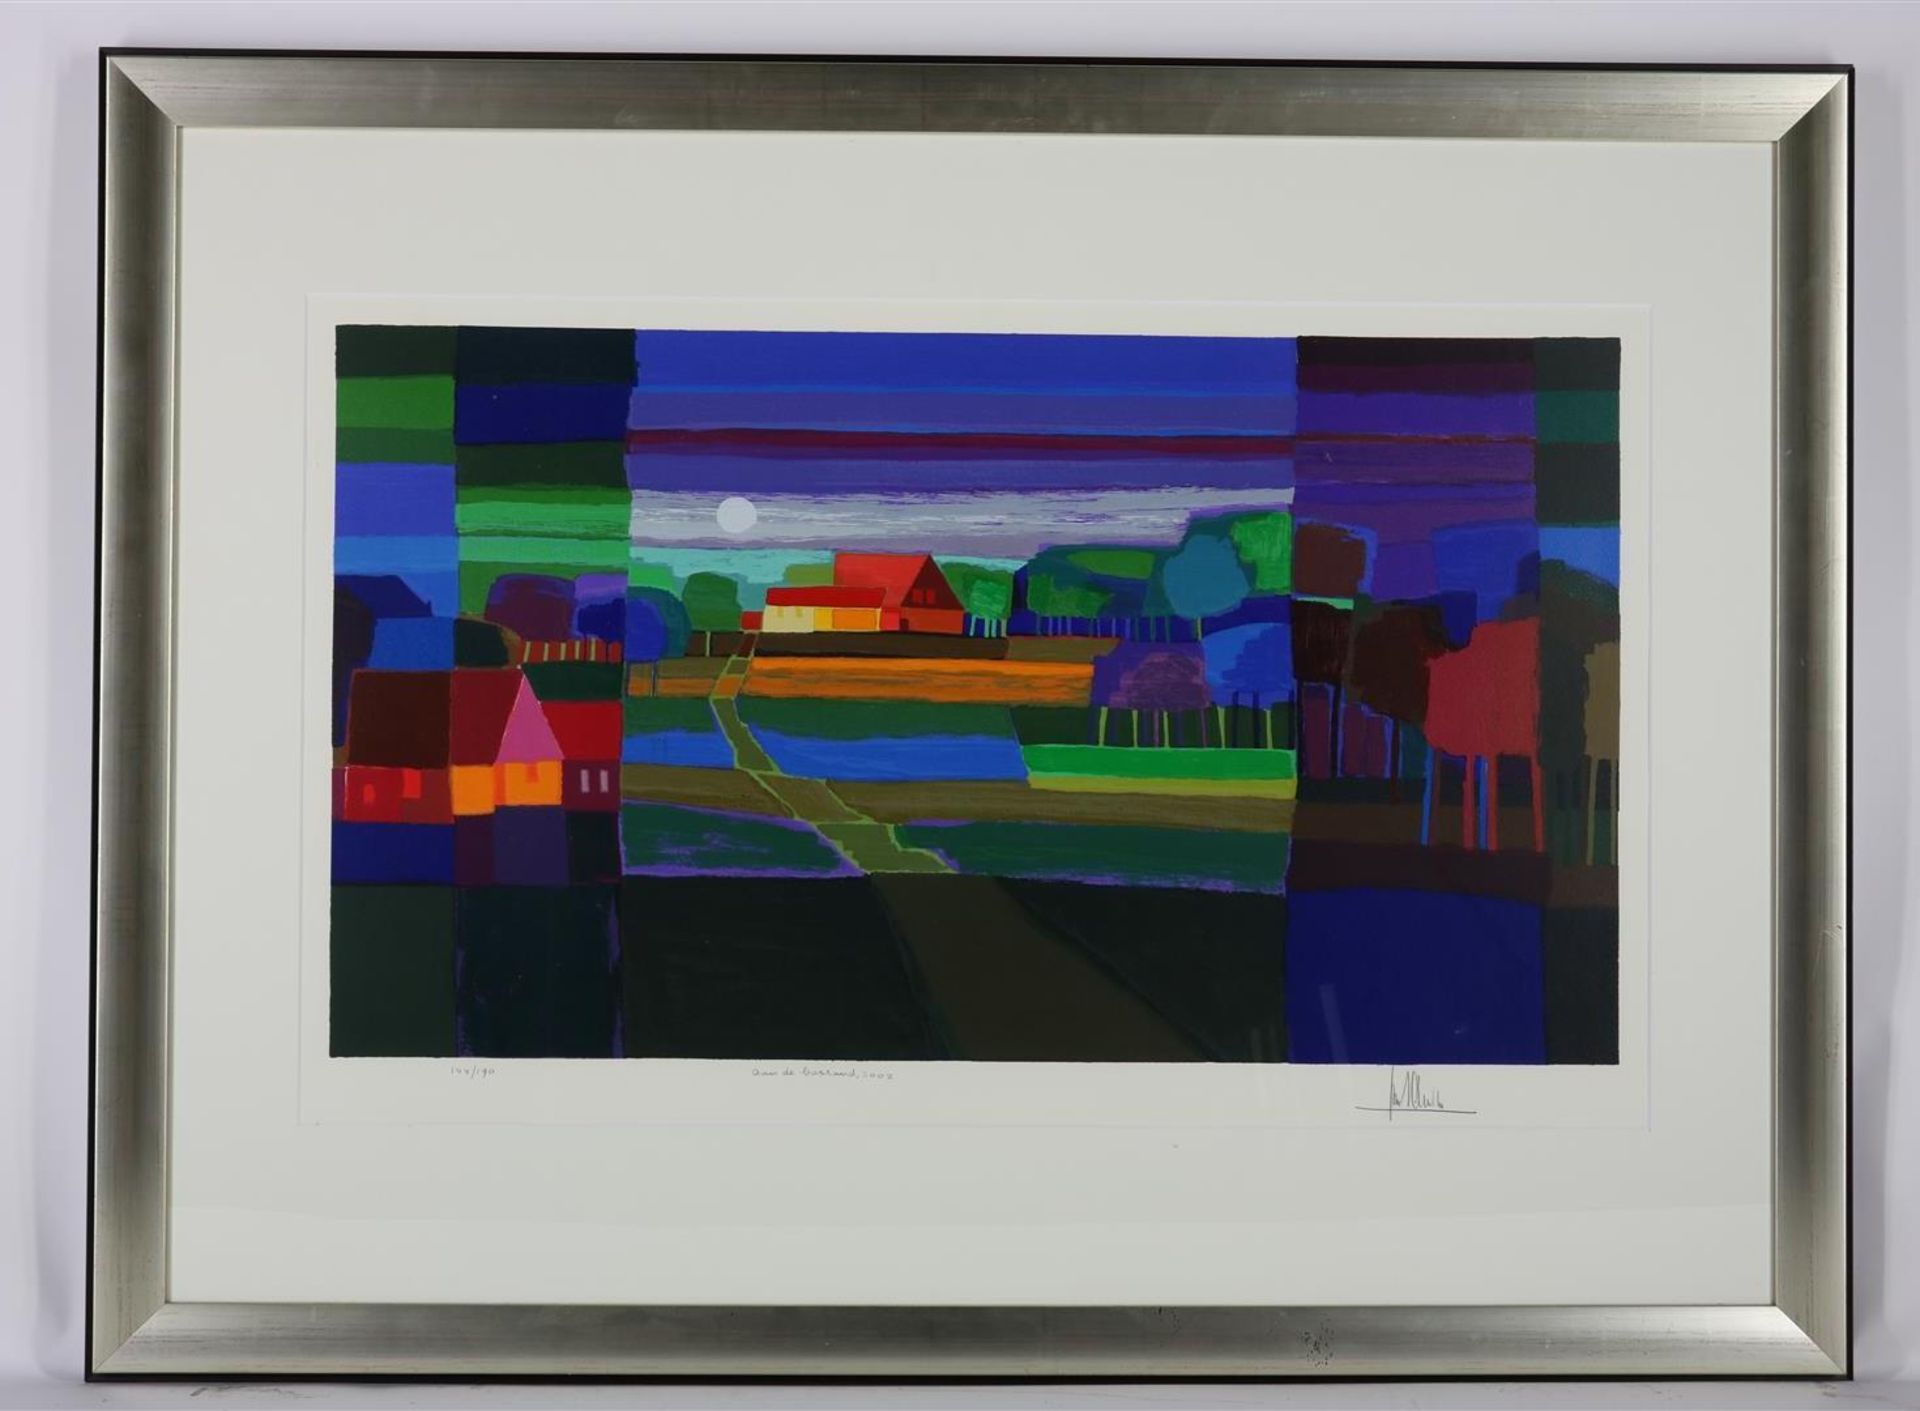 Ton Schulten (1938-) "Aan de bosrand, 2002" signed lower right. Screen print, 144/190, 60 x 95 cm. - Image 2 of 4